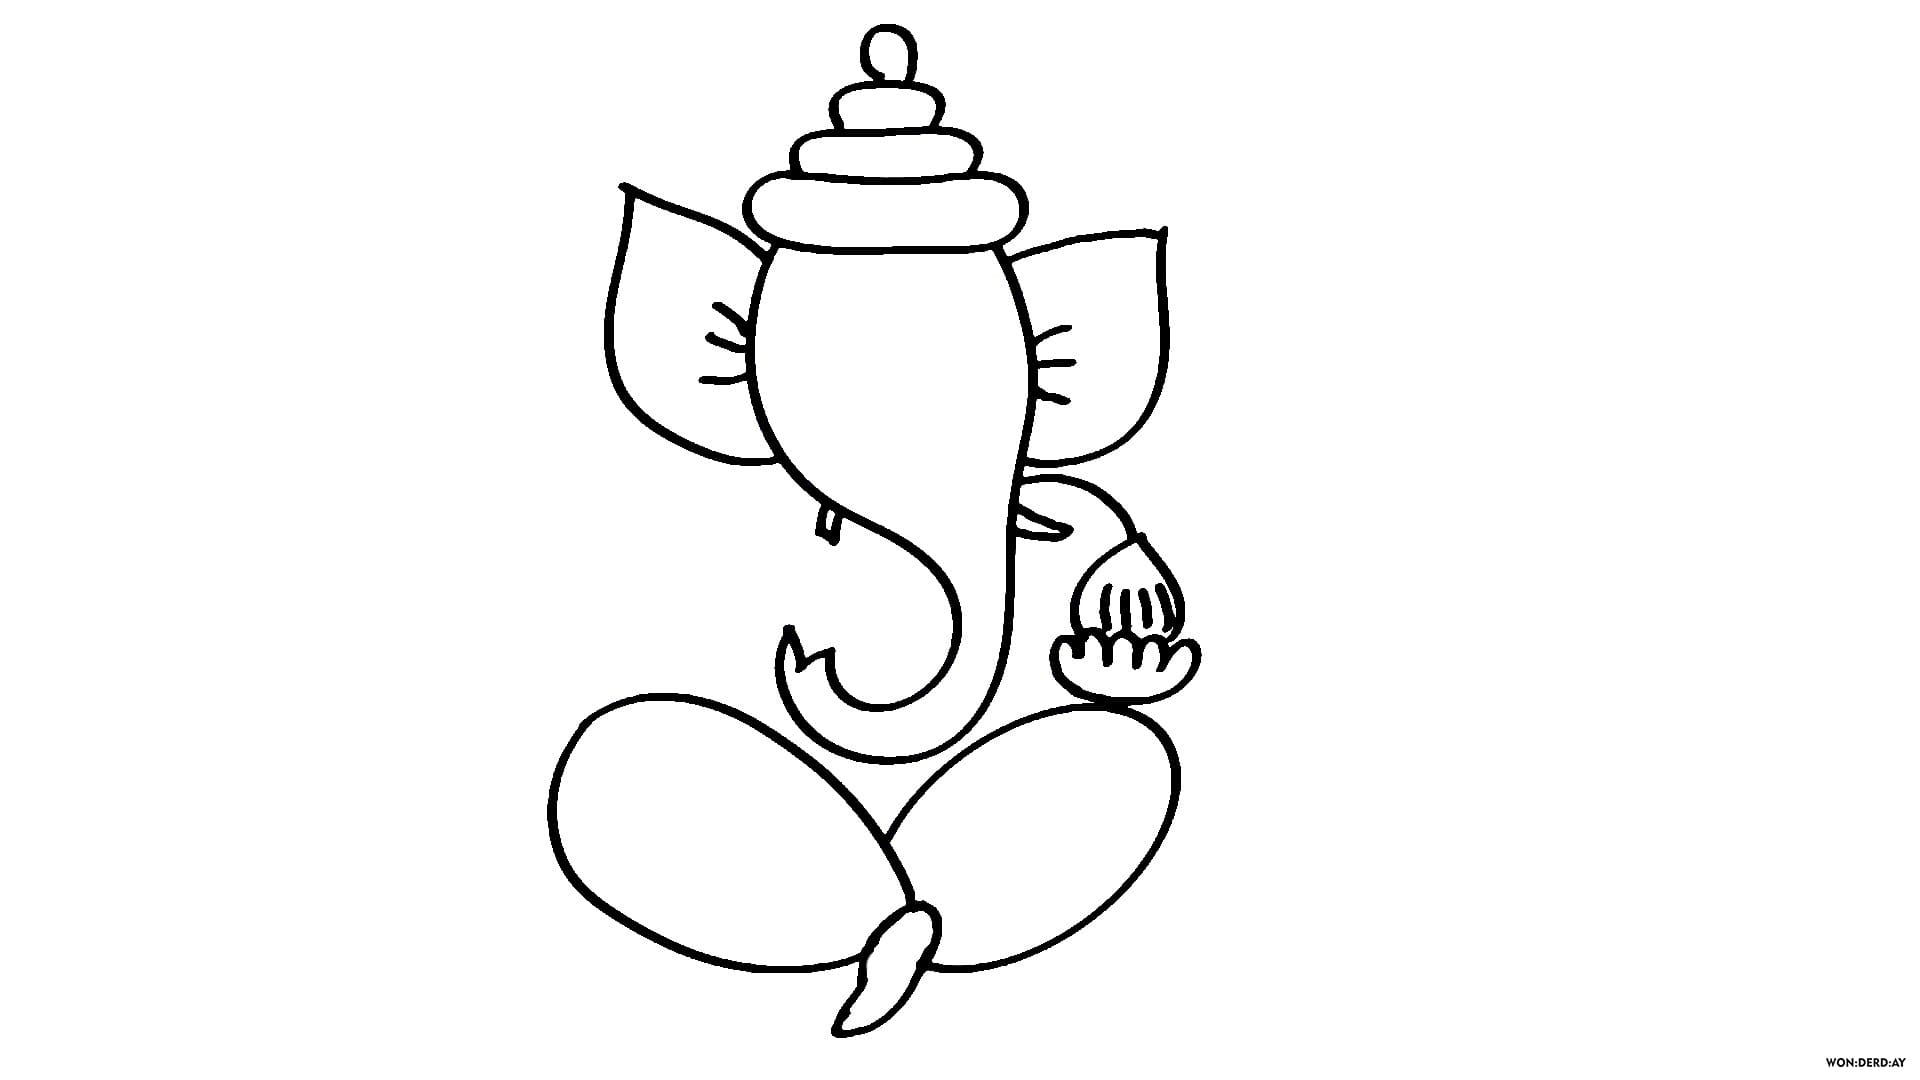 How to Draw Ganesha. 20 Pencil Drawing Lessons | WONDER DAY — Coloring